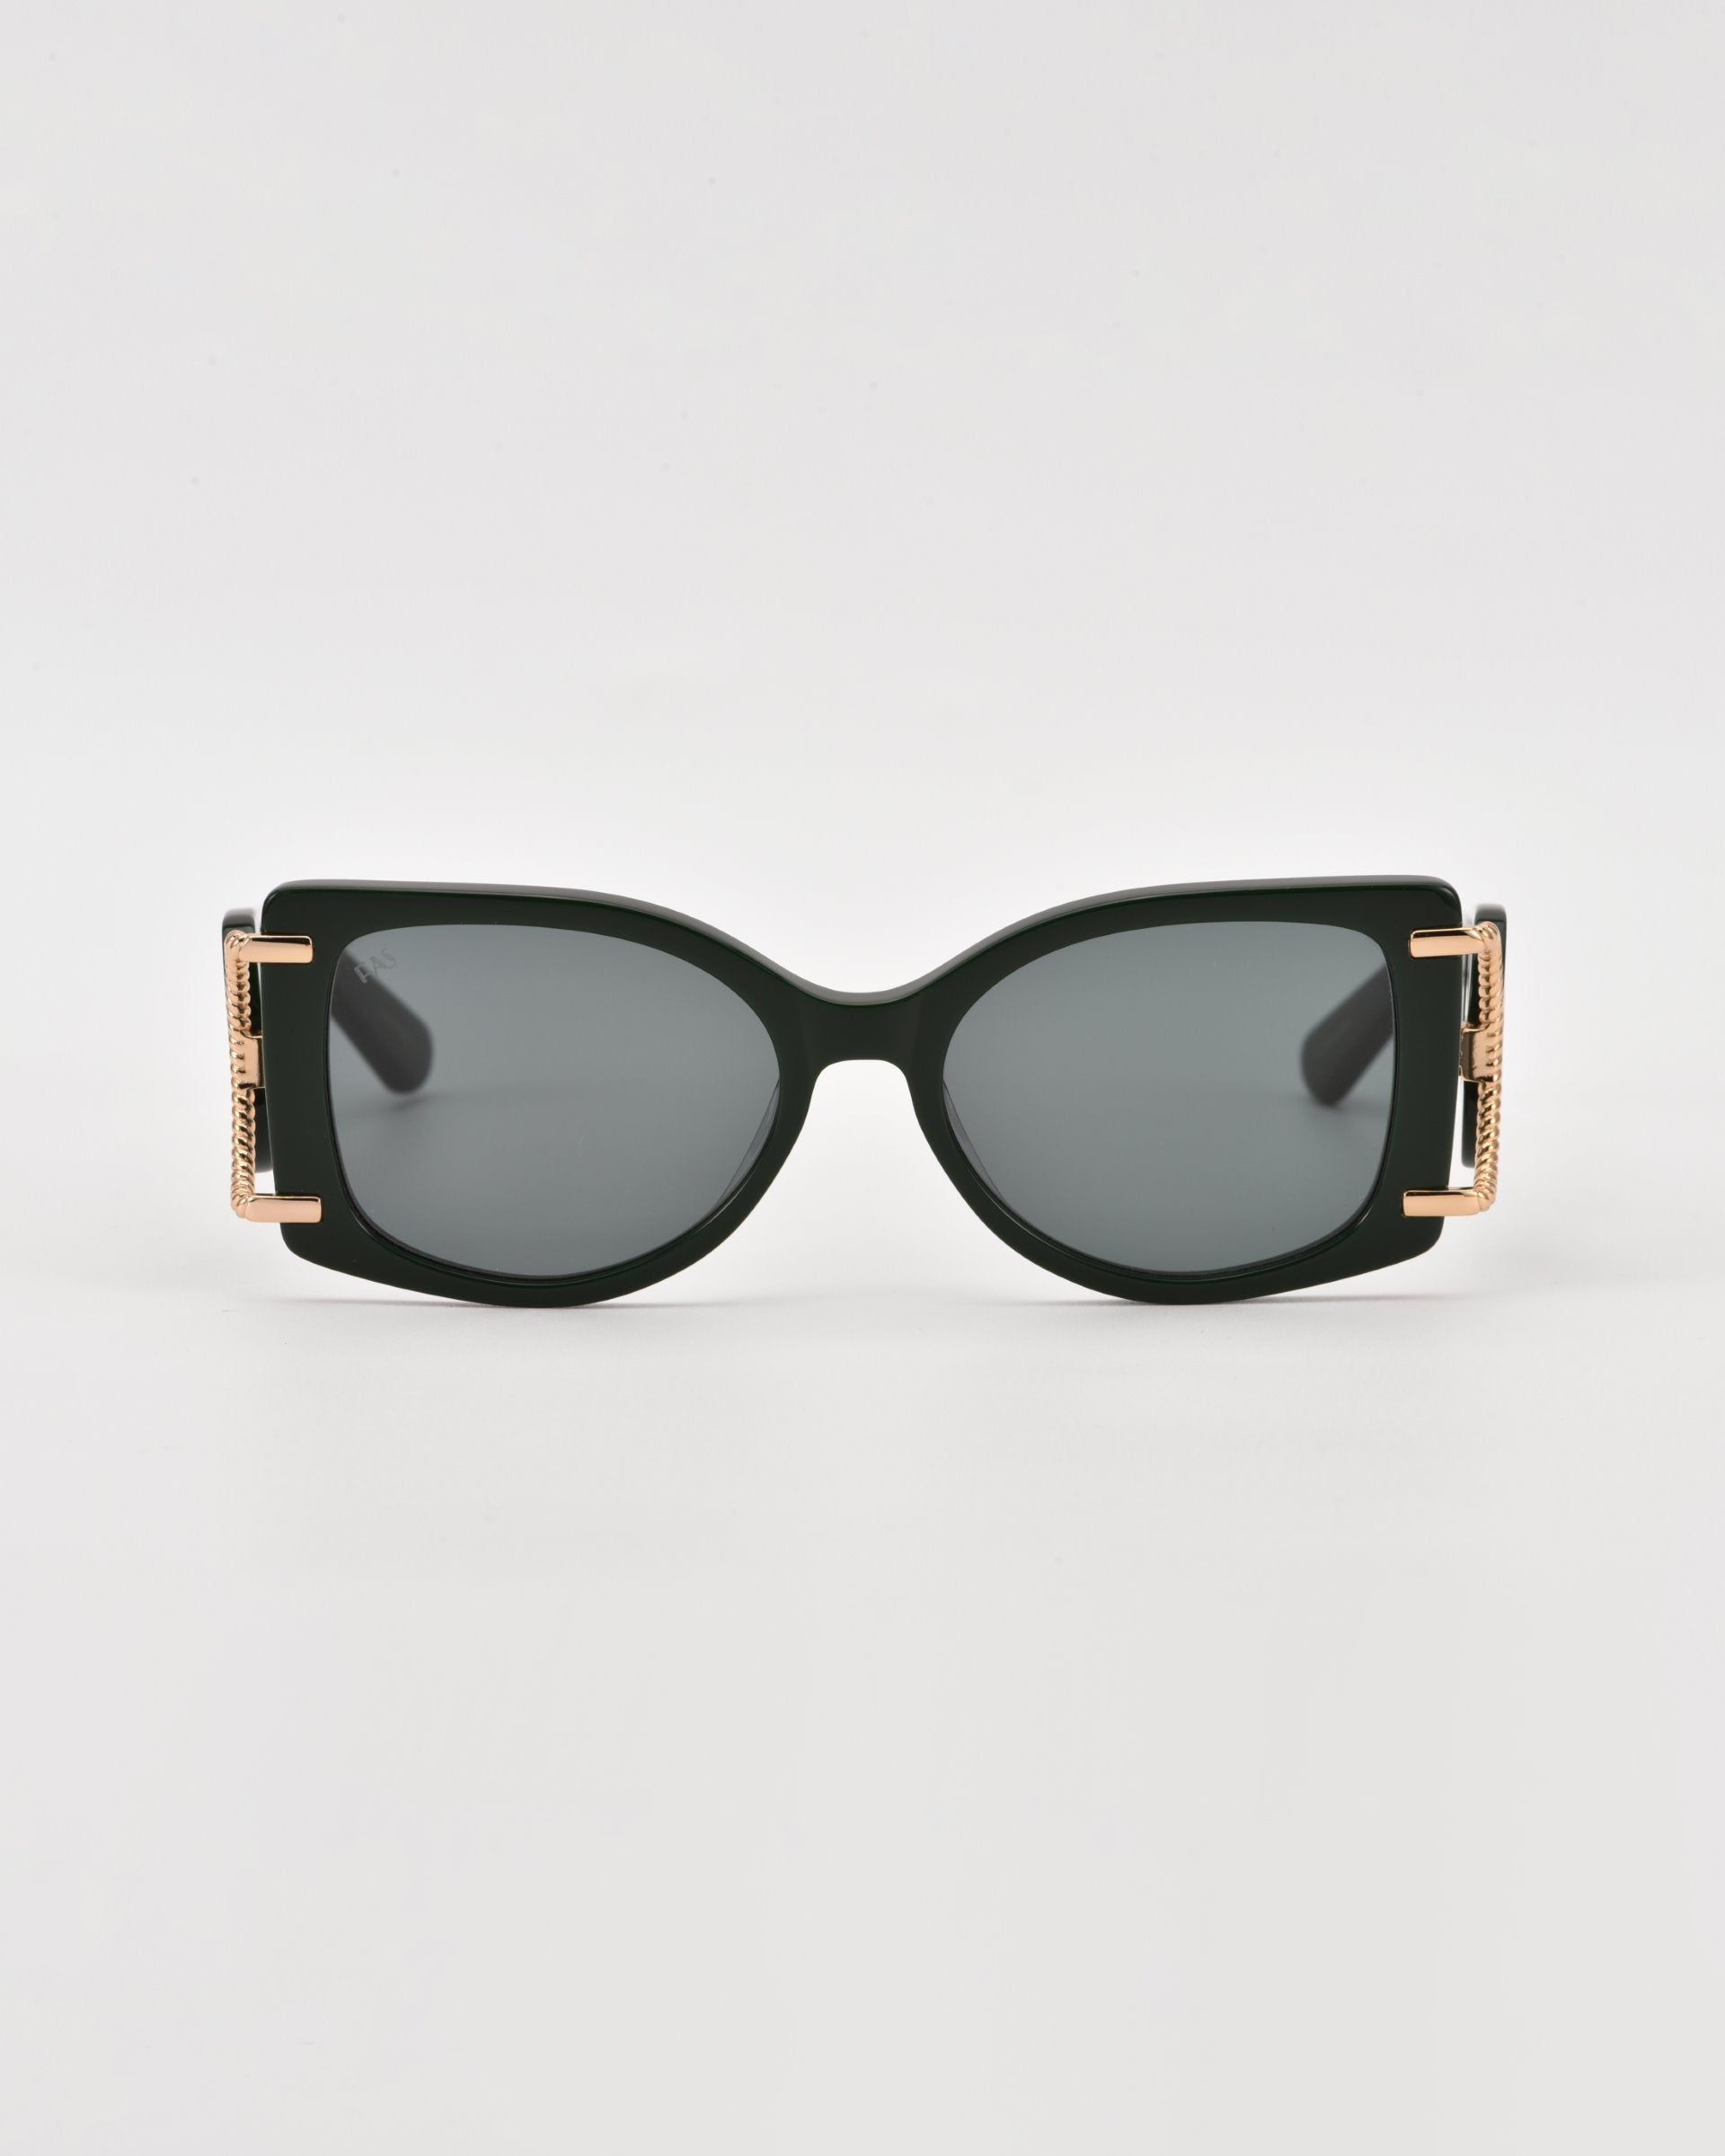 A pair of For Art&#39;s Sake® Sculpture black rectangular acetate sunglasses with dark lenses. The arms of the sunglasses feature 18-karat gold-plated accents near the hinges, adding a touch of elegance. These For Art&#39;s Sake® Sculpture sunglasses, offering 100% UVA &amp; UVB protection, are set against a plain white background.